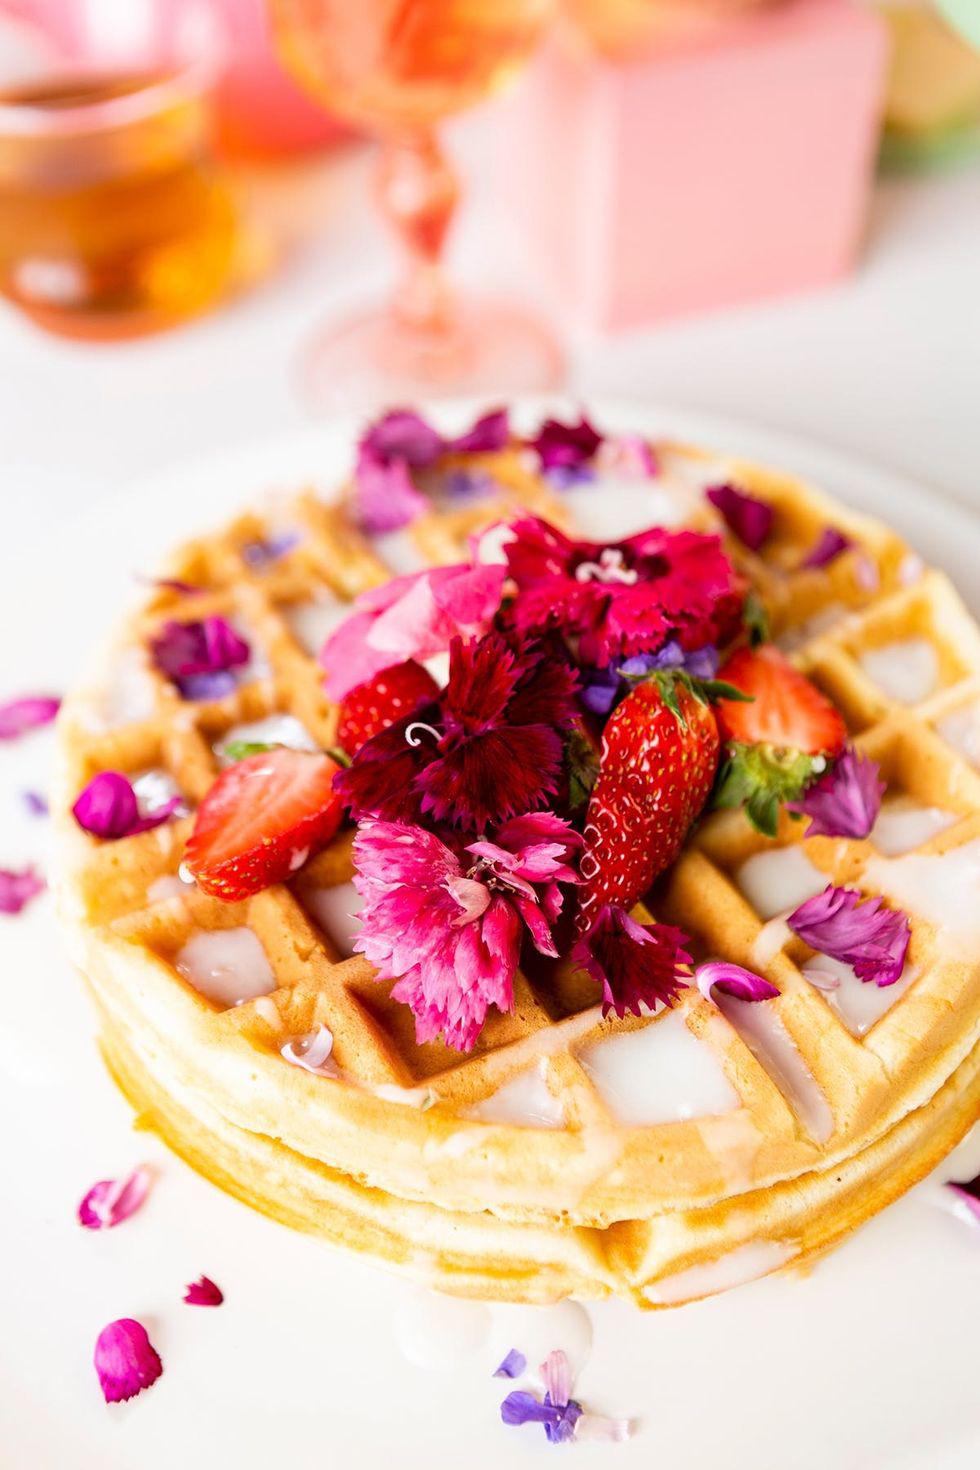 Dust off that waffle maker. The kids *and* adults will love this recipe, which also makes for an amazing addition to Mother's Day or Valentine's Day. (via Brit + Co.)